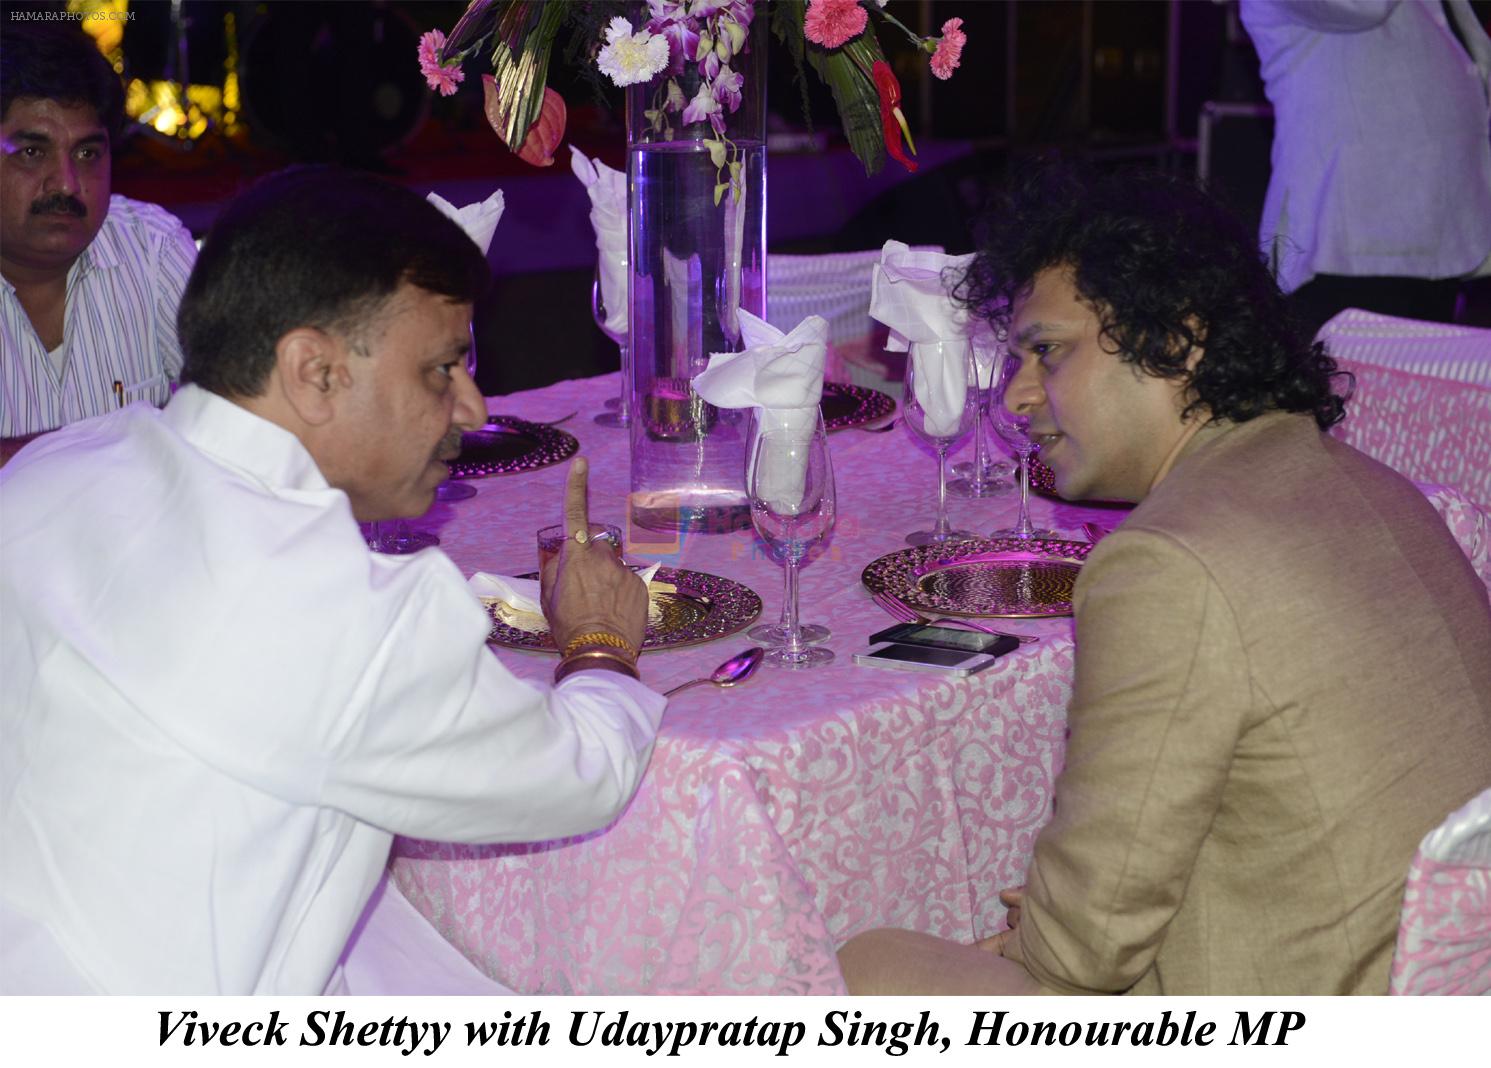 Viveck Shettyy with Udaypratap Singh, Honourable MP at the Reception of Jai Singh and Shradha Singh on 7th May 2013